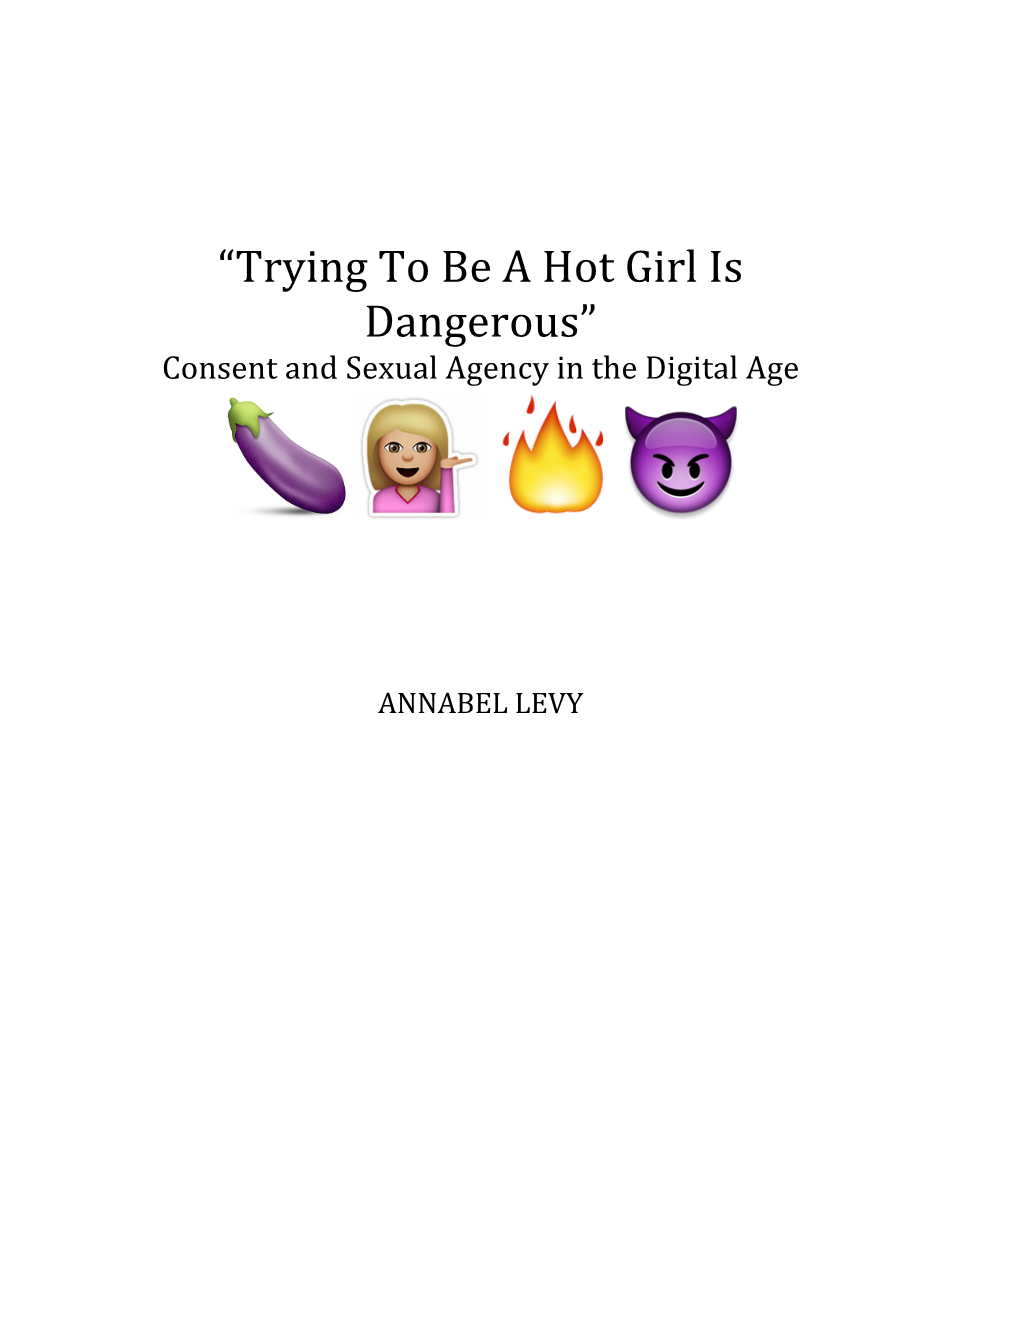 “Trying to Be a Hot Girl Is Dangerous”